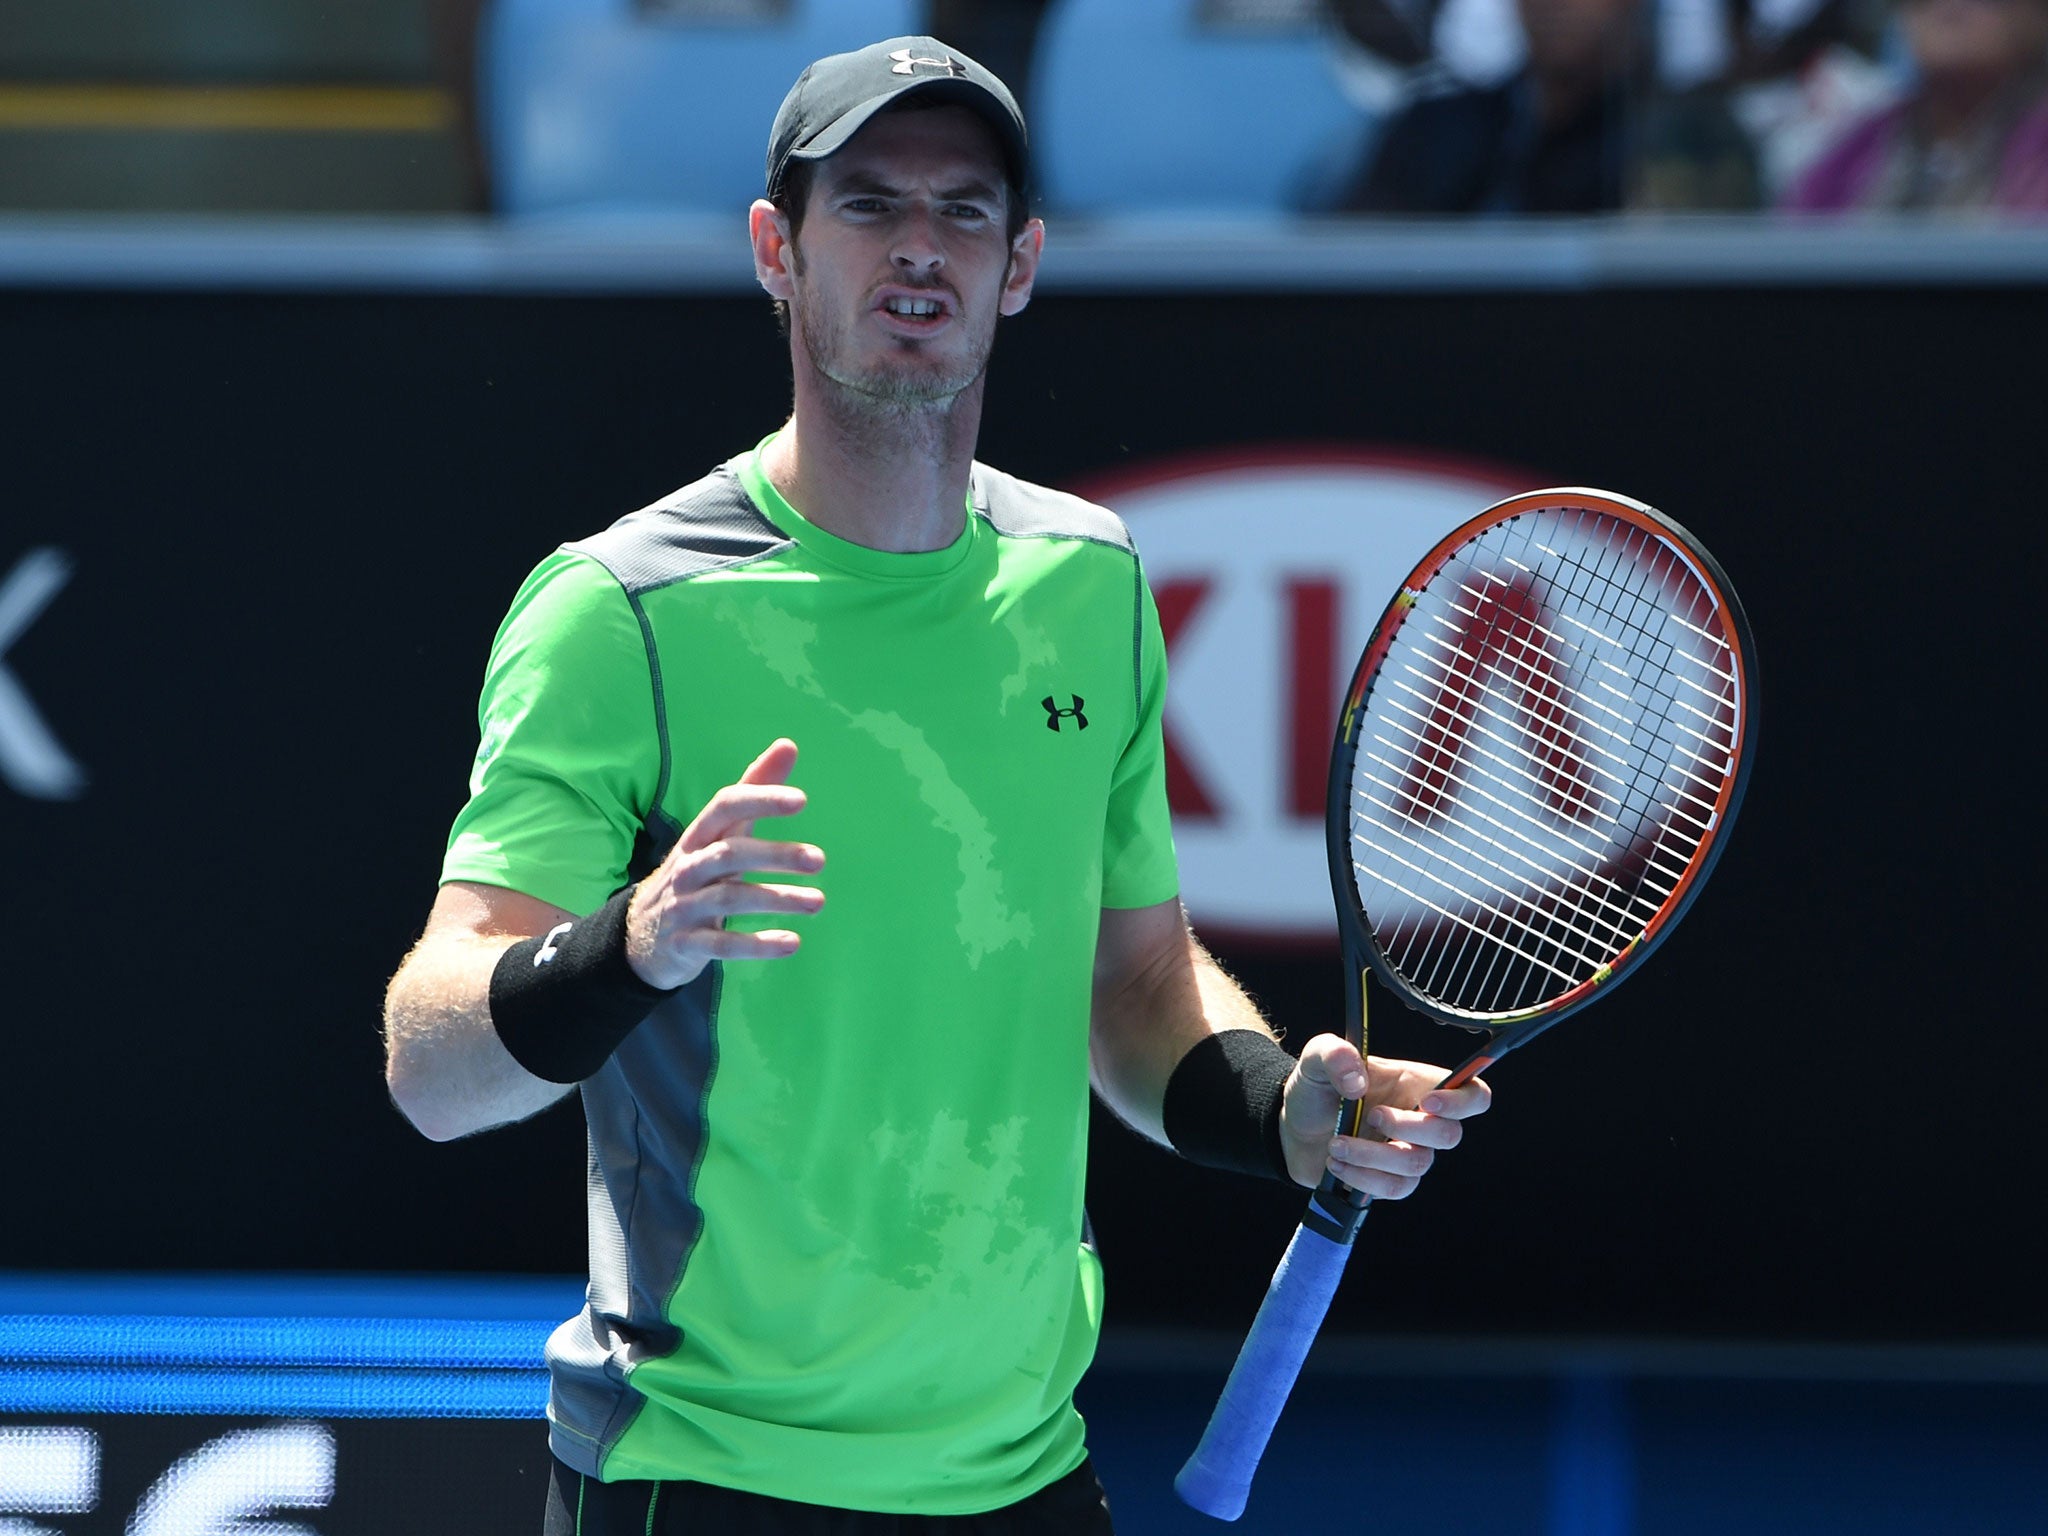 Andy Murray beat Yuri Bhambri in the first round 6-3, 6-4, 7-6